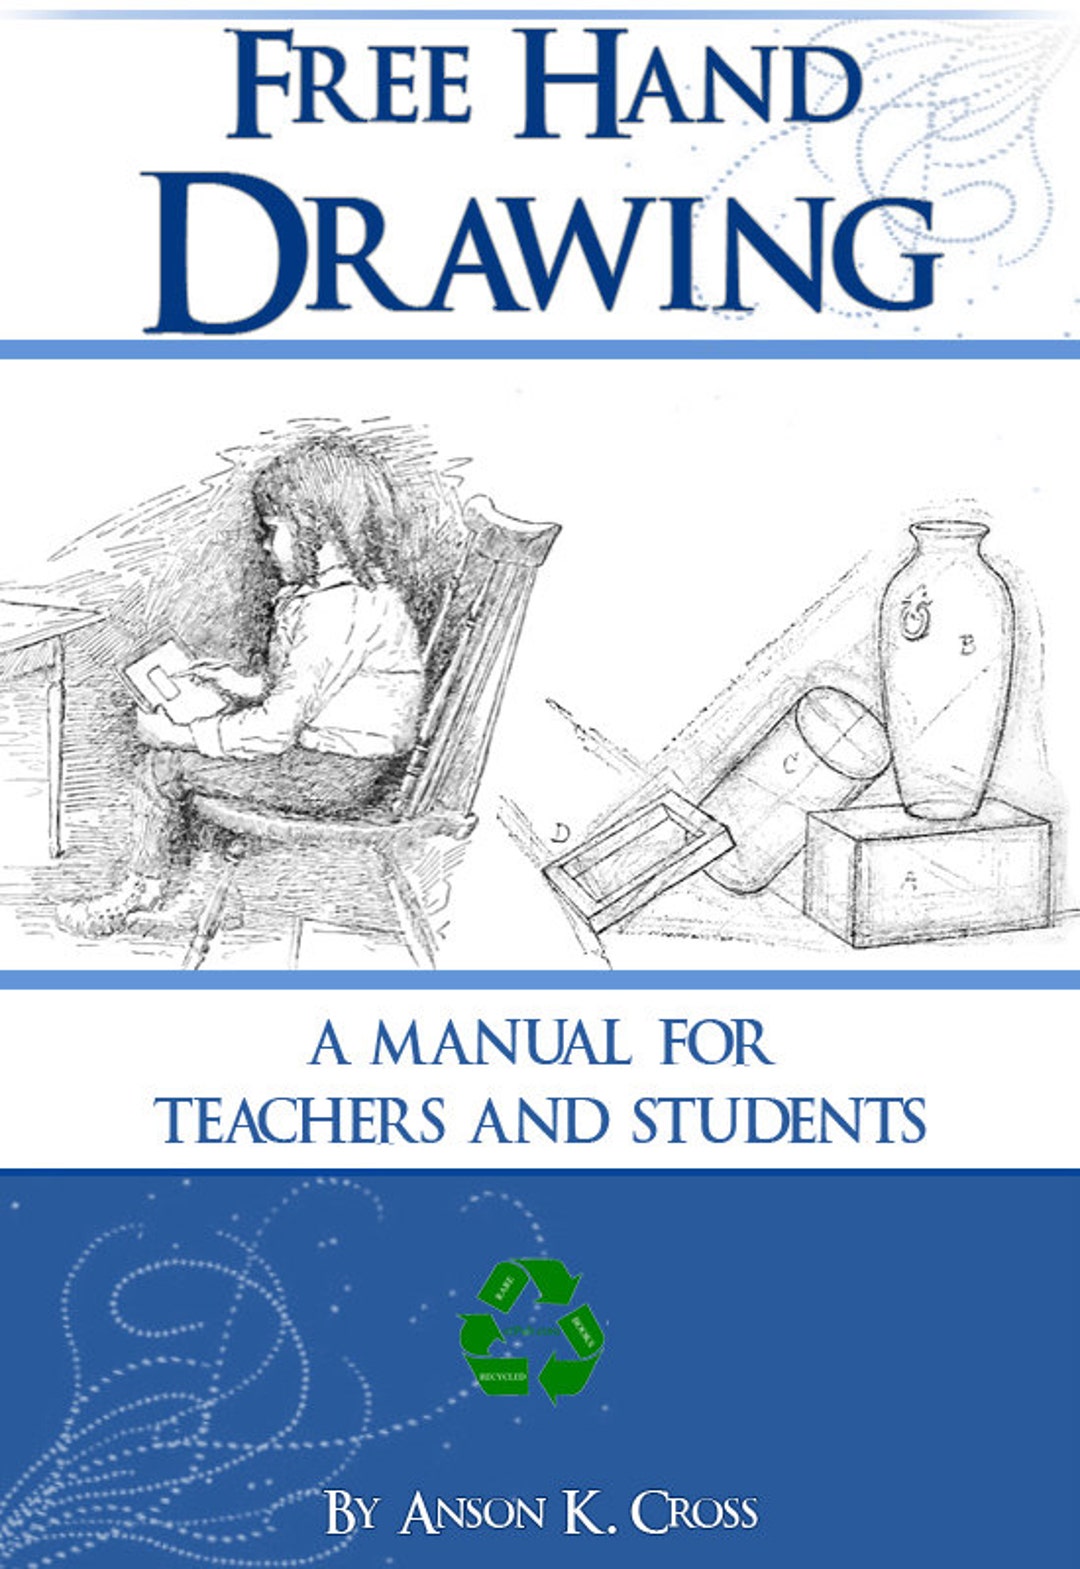 FREEHAND　India　and　in　Teachers　Learn　for　Online　to　Students　DRAWING　Manual　A　Buy　Etsy